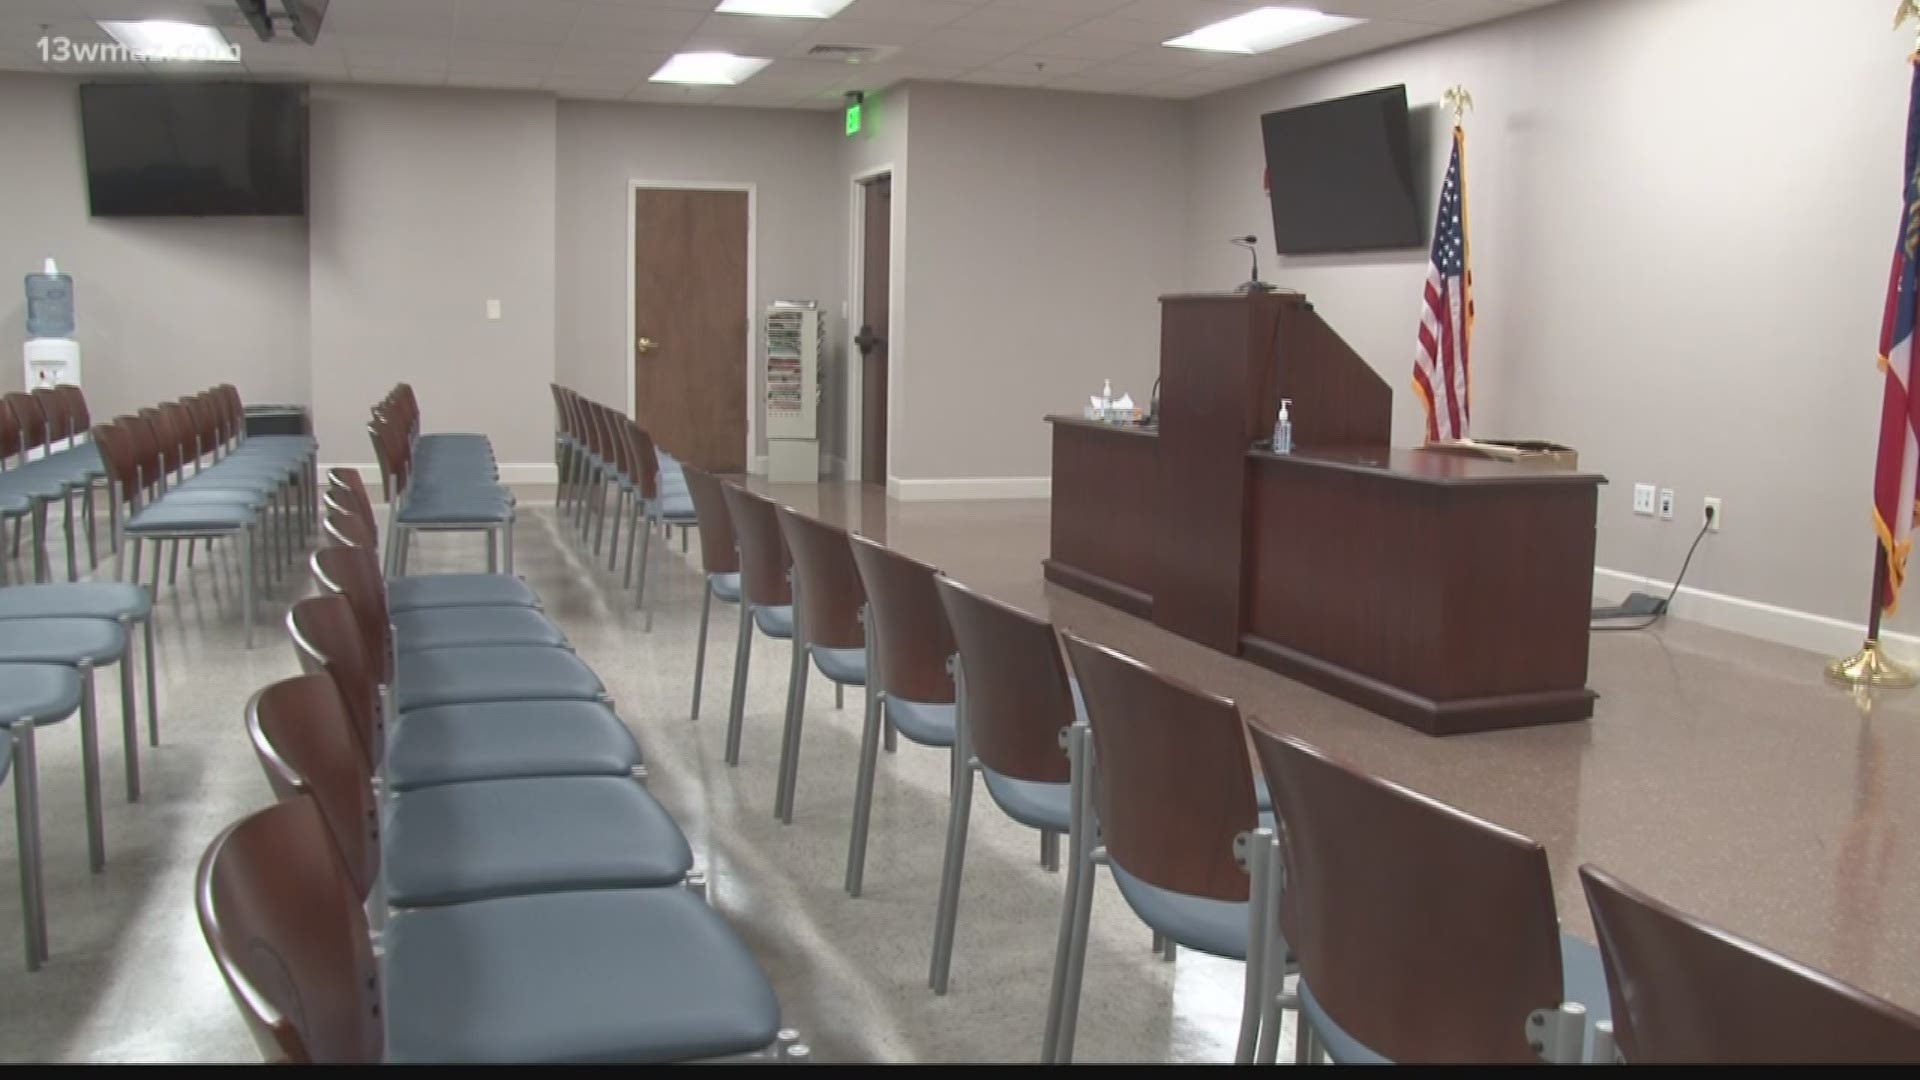 VERIFY: Does the law requires employers to pay for jury duty?